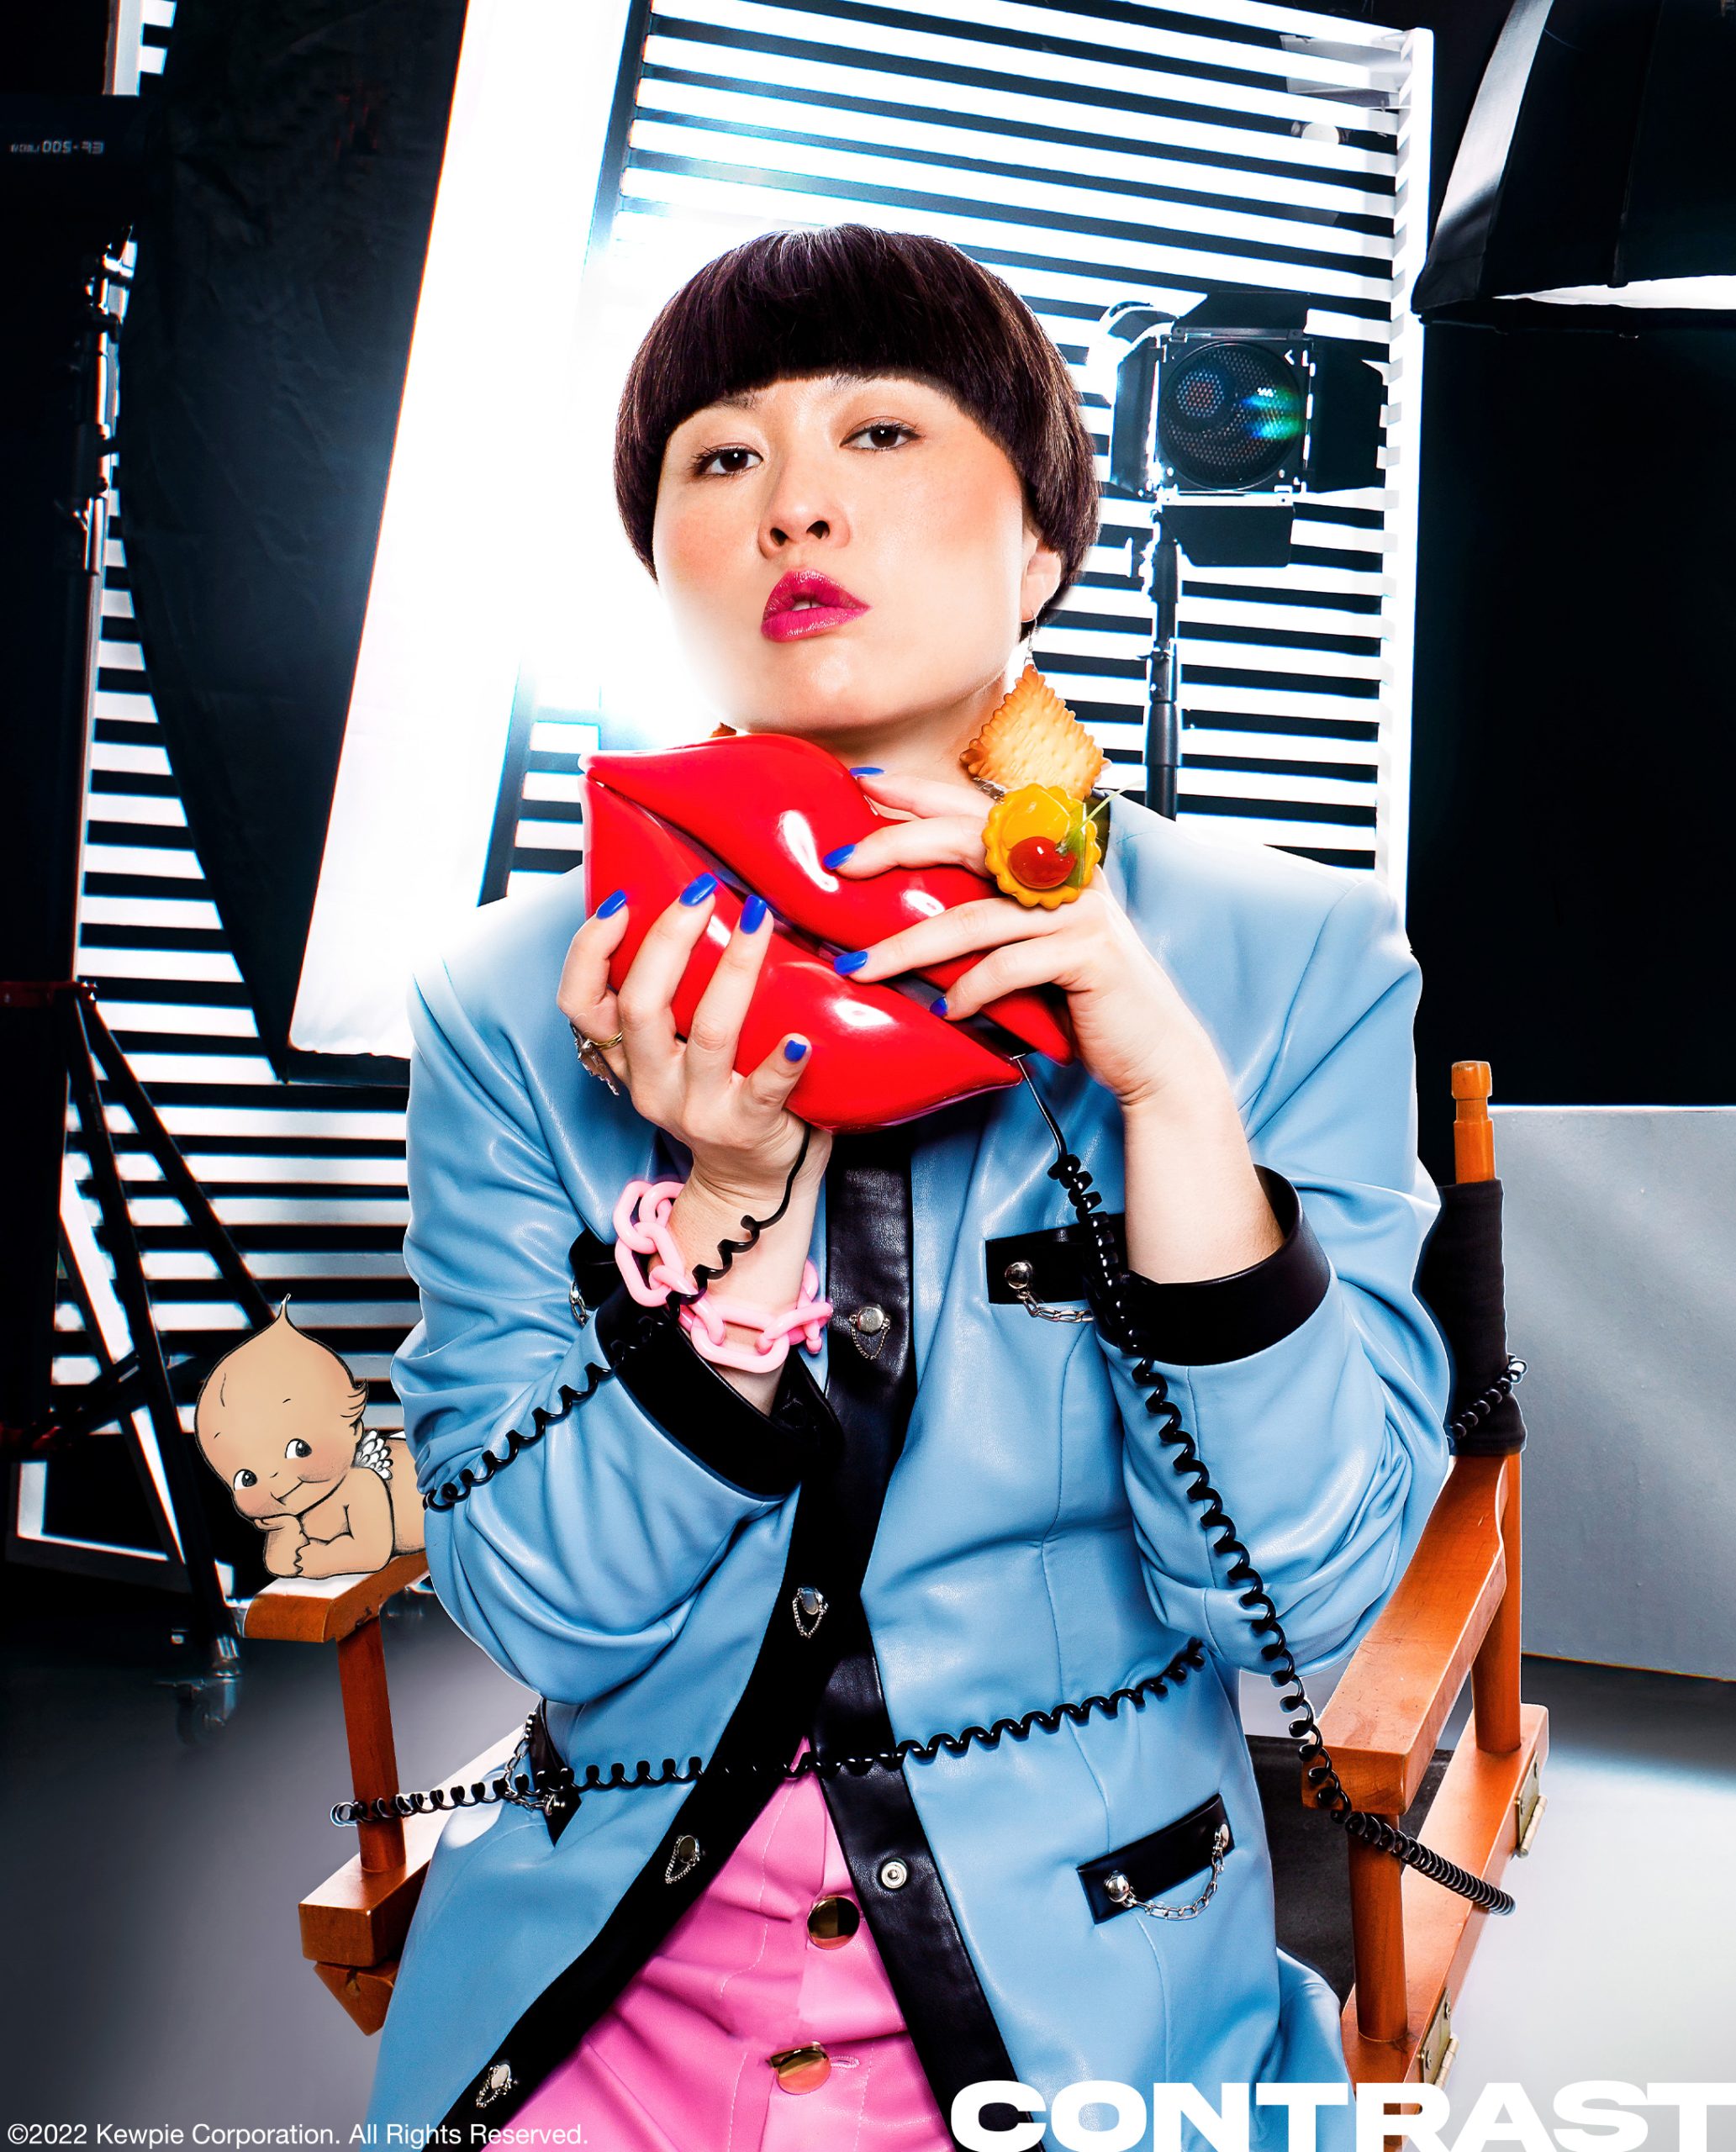 Comedian and HBO MAx star Atsuko Okastuko poses in a director's chair wearing blue blazaer jacket and a pink skirt holding a red lips house phone and surrounded by stage production lights. The image features an illustrated dark tone Kewpie doll character. This editorial was produced by ONCH, formerly known as Onch Movement.